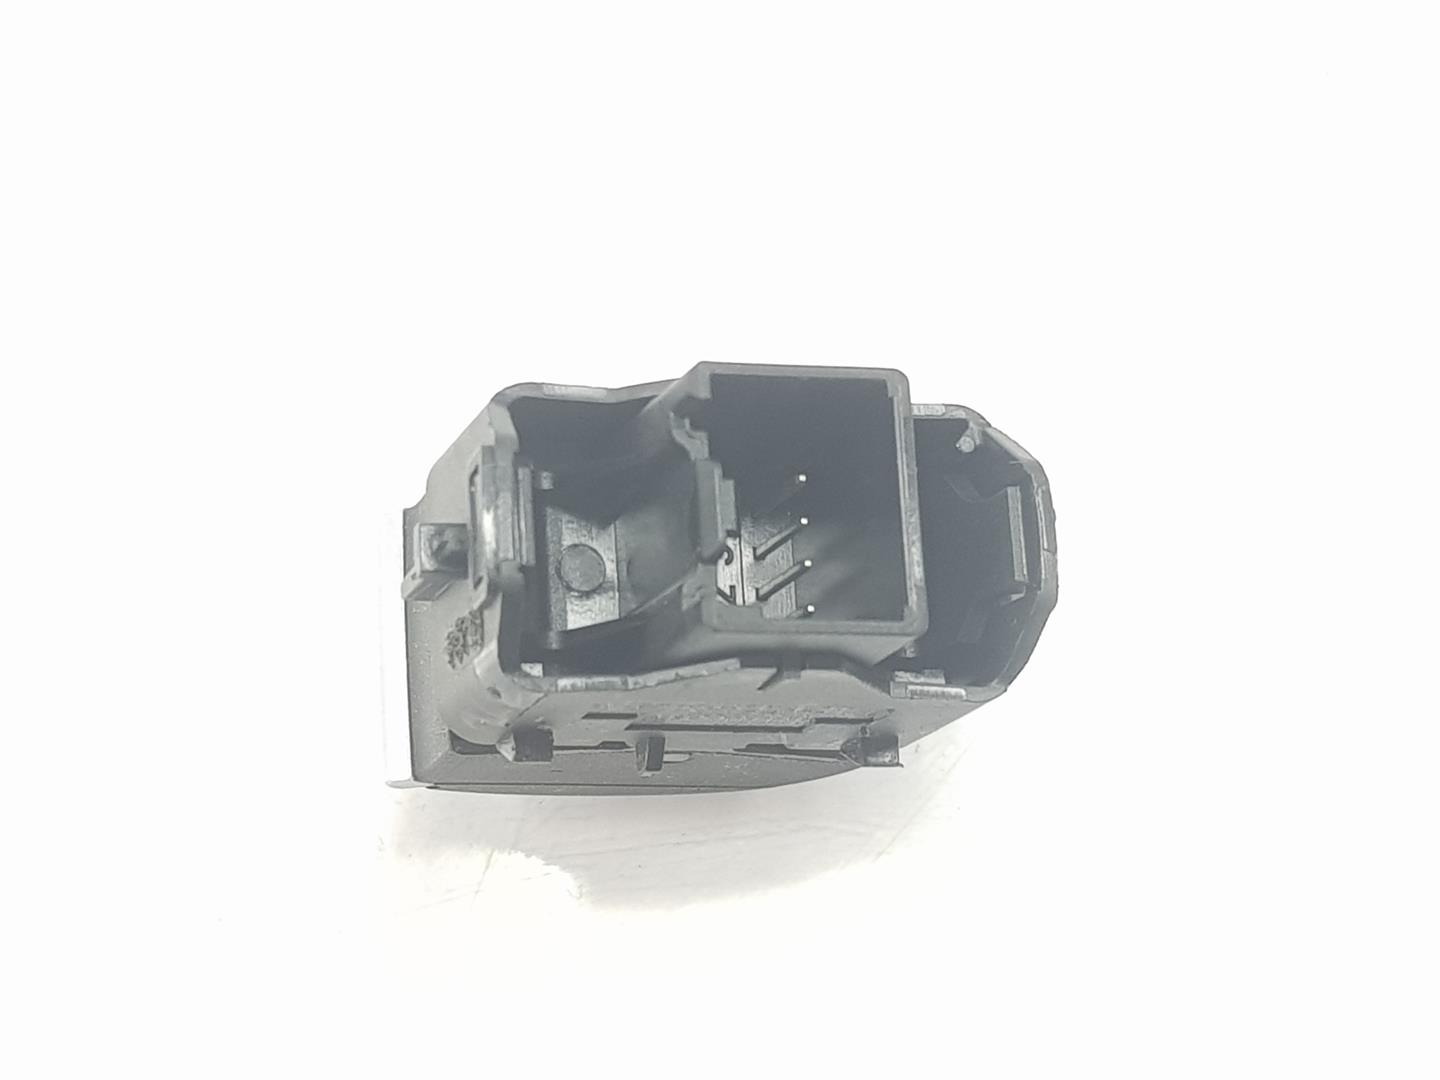 FORD Kuga 2 generation (2013-2020) Rear Right Door Window Control Switch 1850432, F1ET14529AA, 1141CB2222DL 19935301